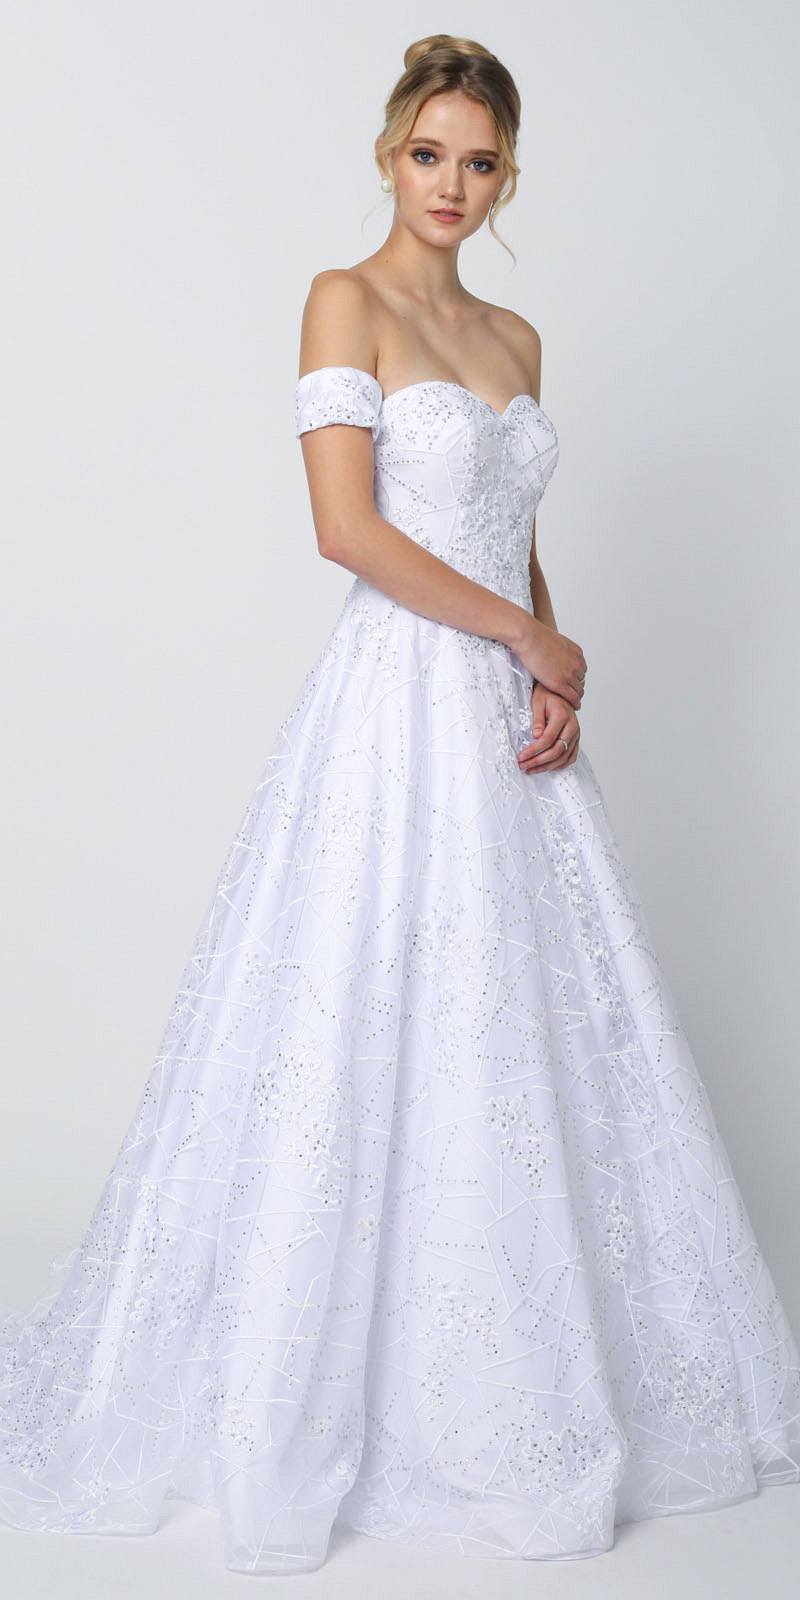 Juliet 692 Long Embroidered Lace Ball Gown Dress White With Arm Band